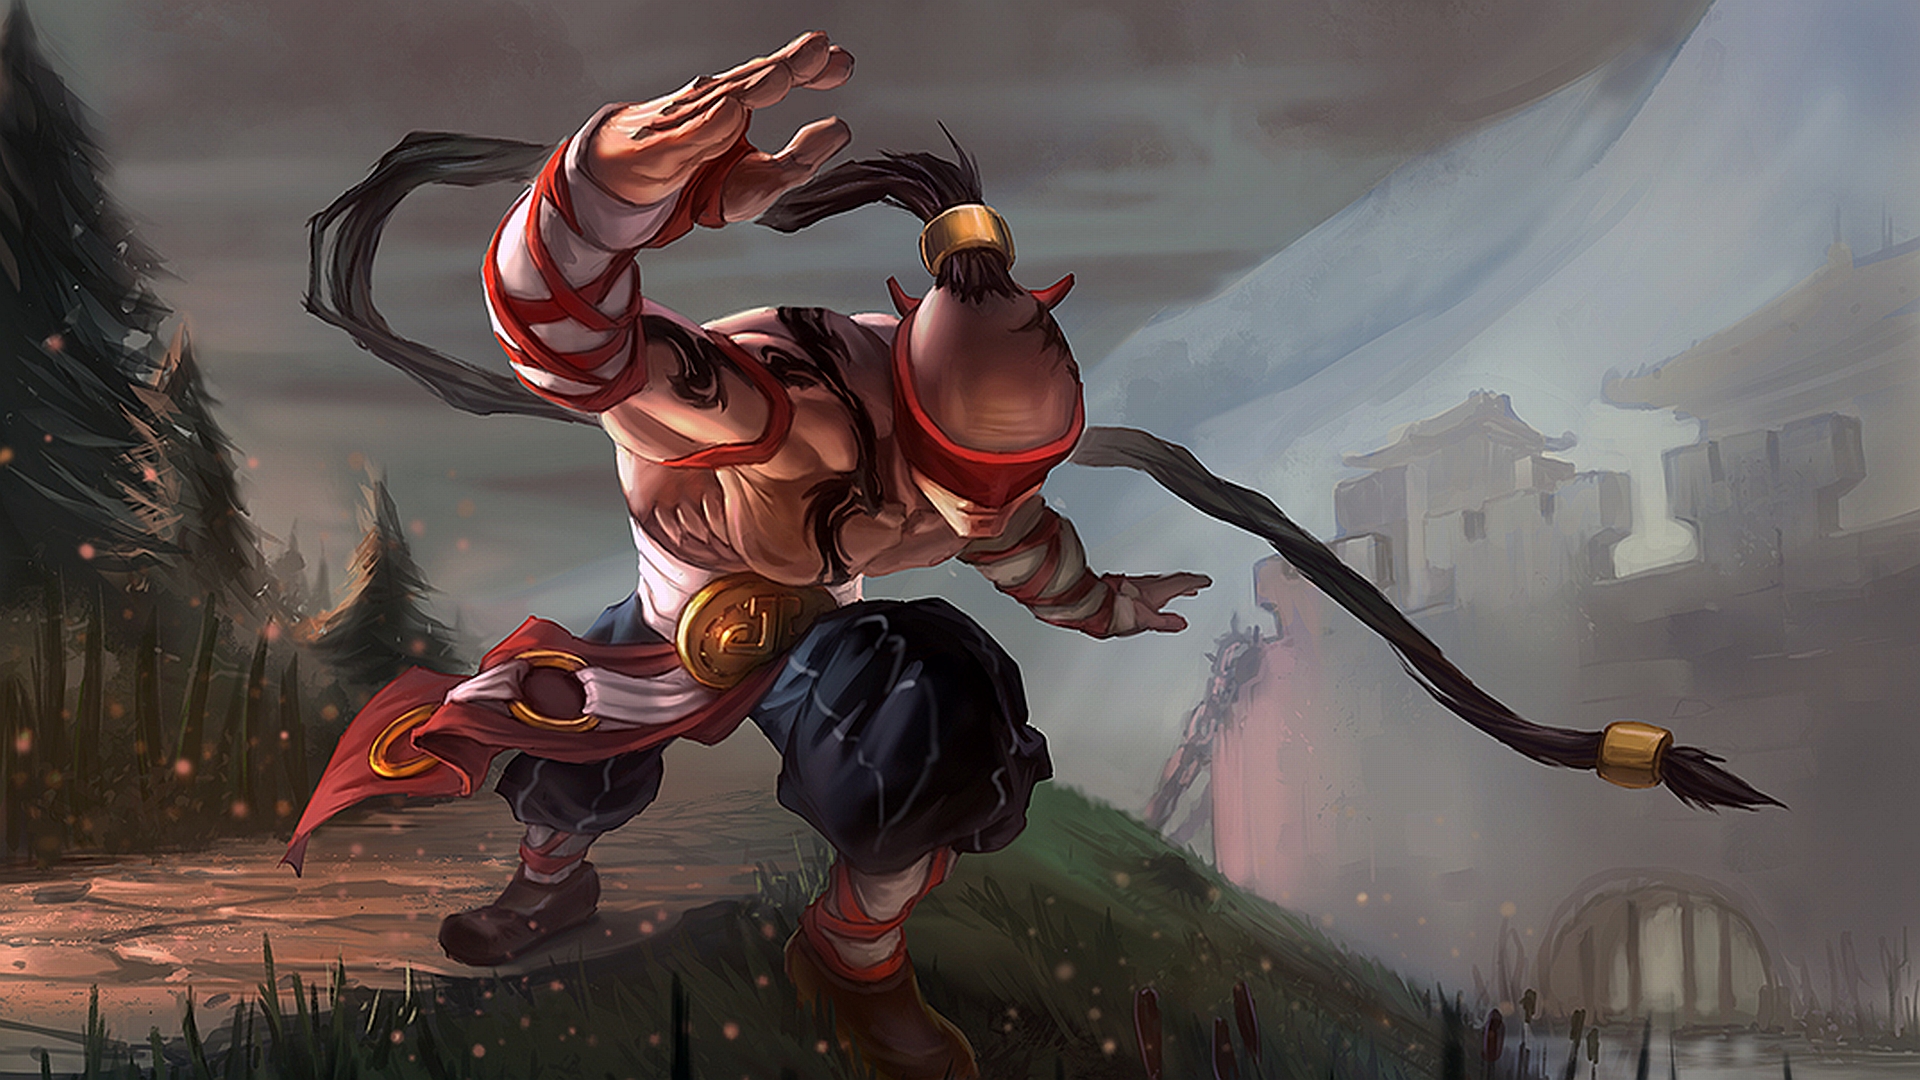 Lee Sin, a character from the video game League of Legends, striking a powerful stance.